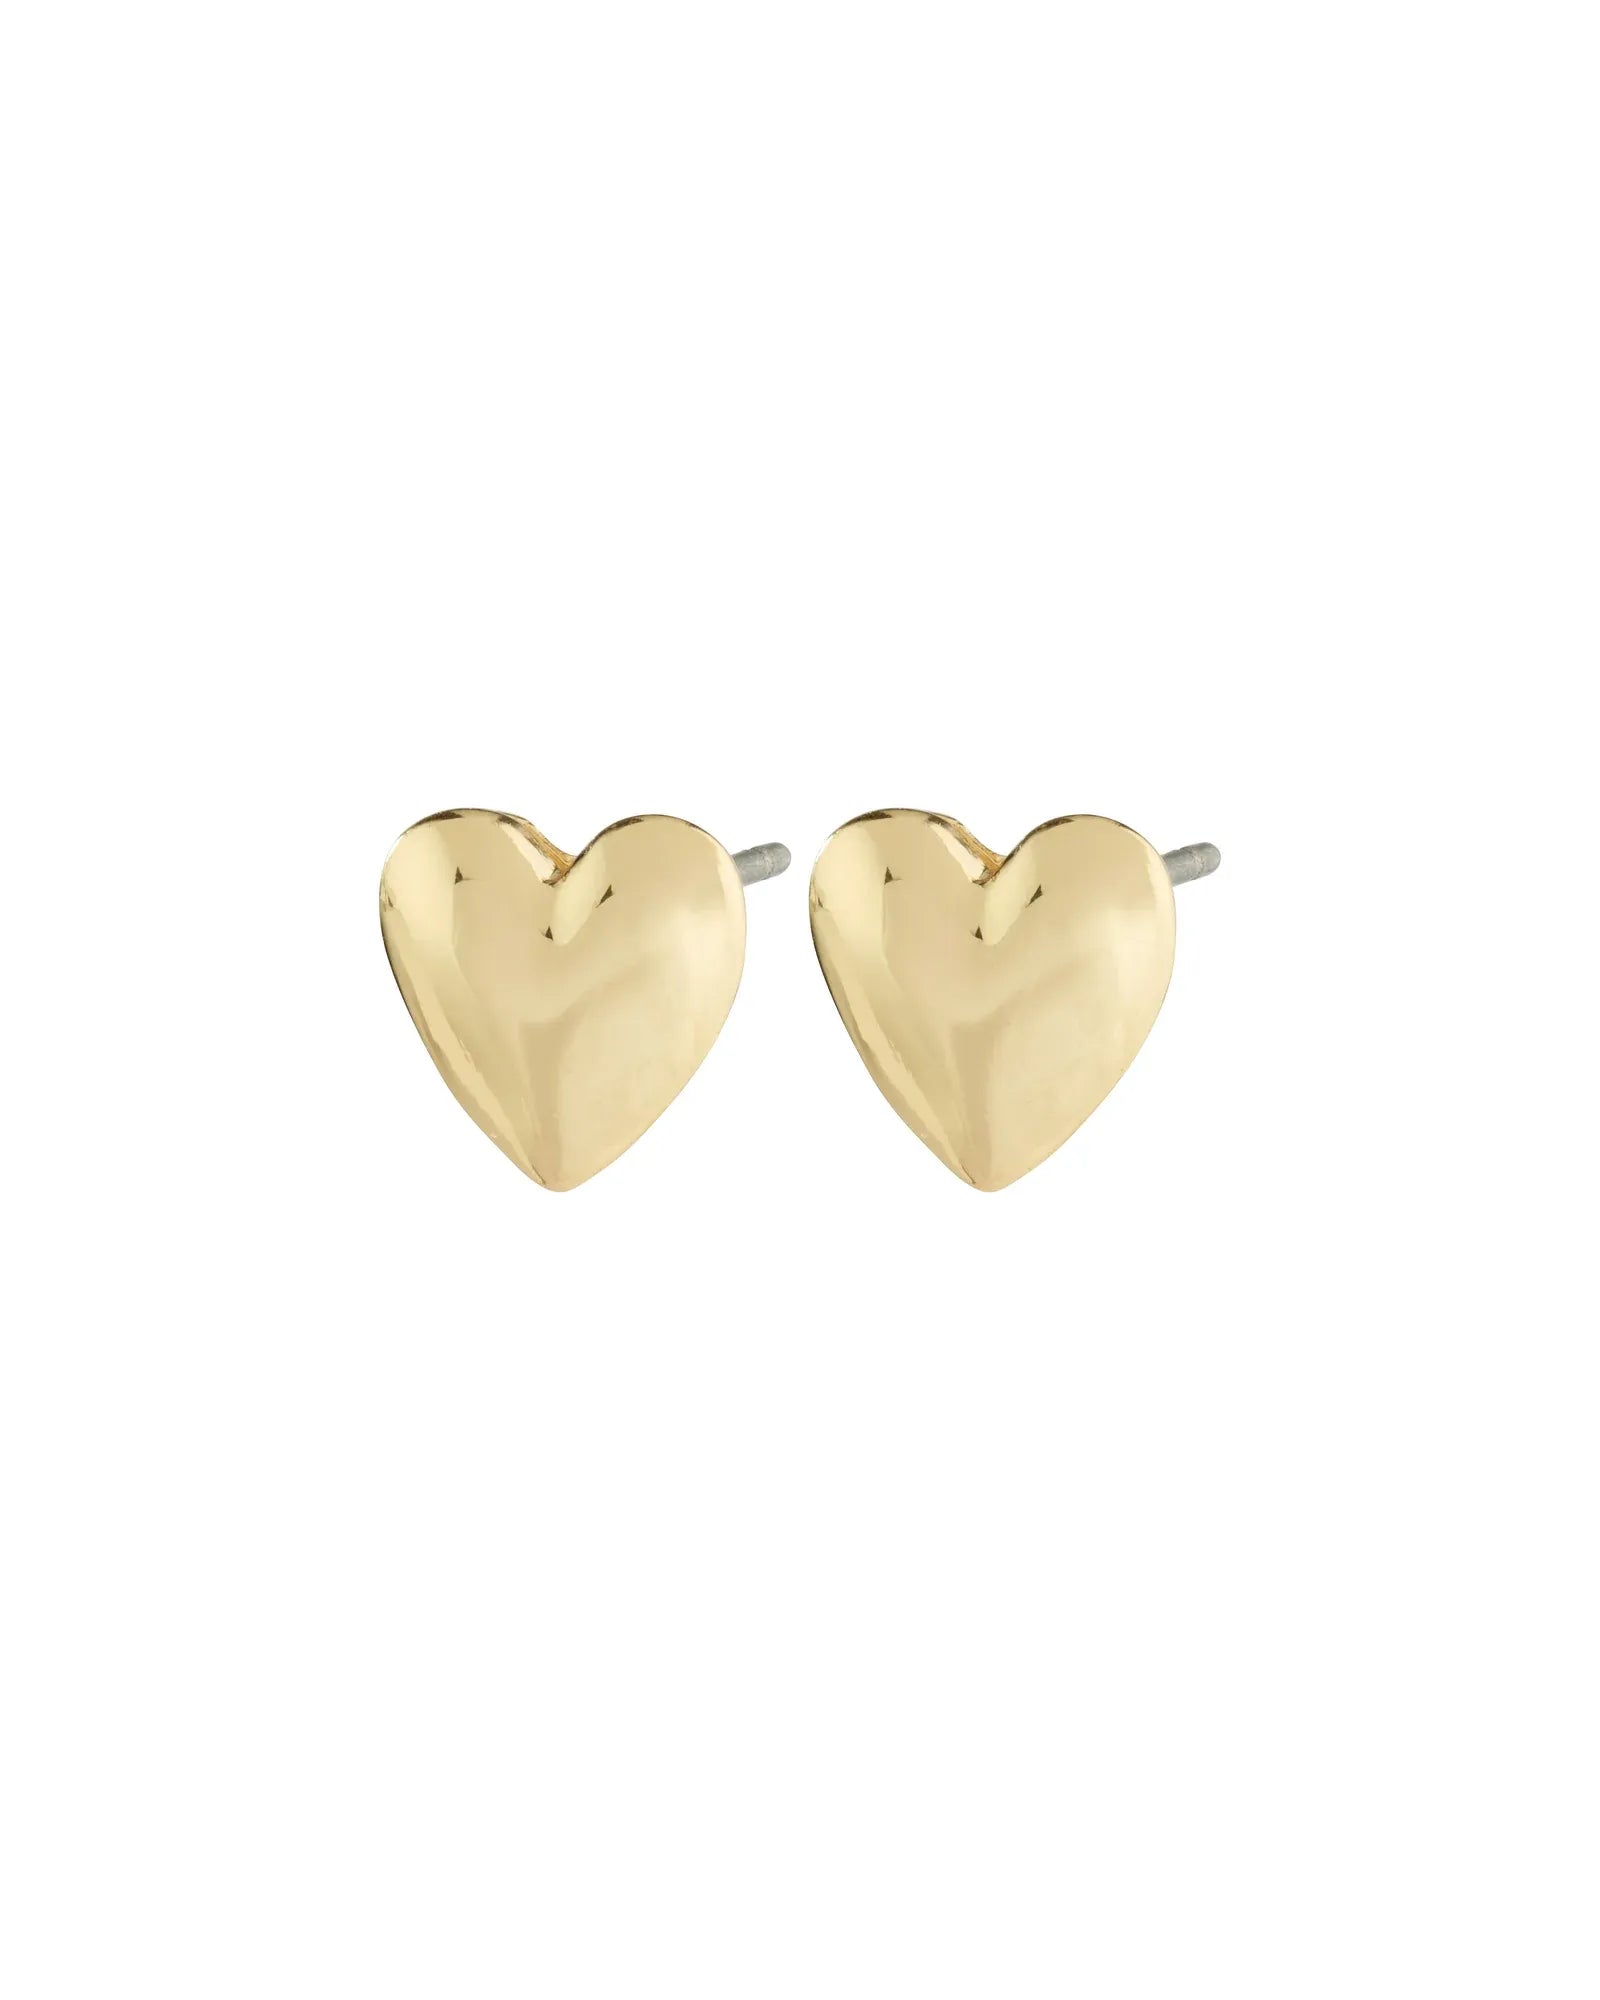 SOPHIA Recycled Heart Earrings - Gold Plated